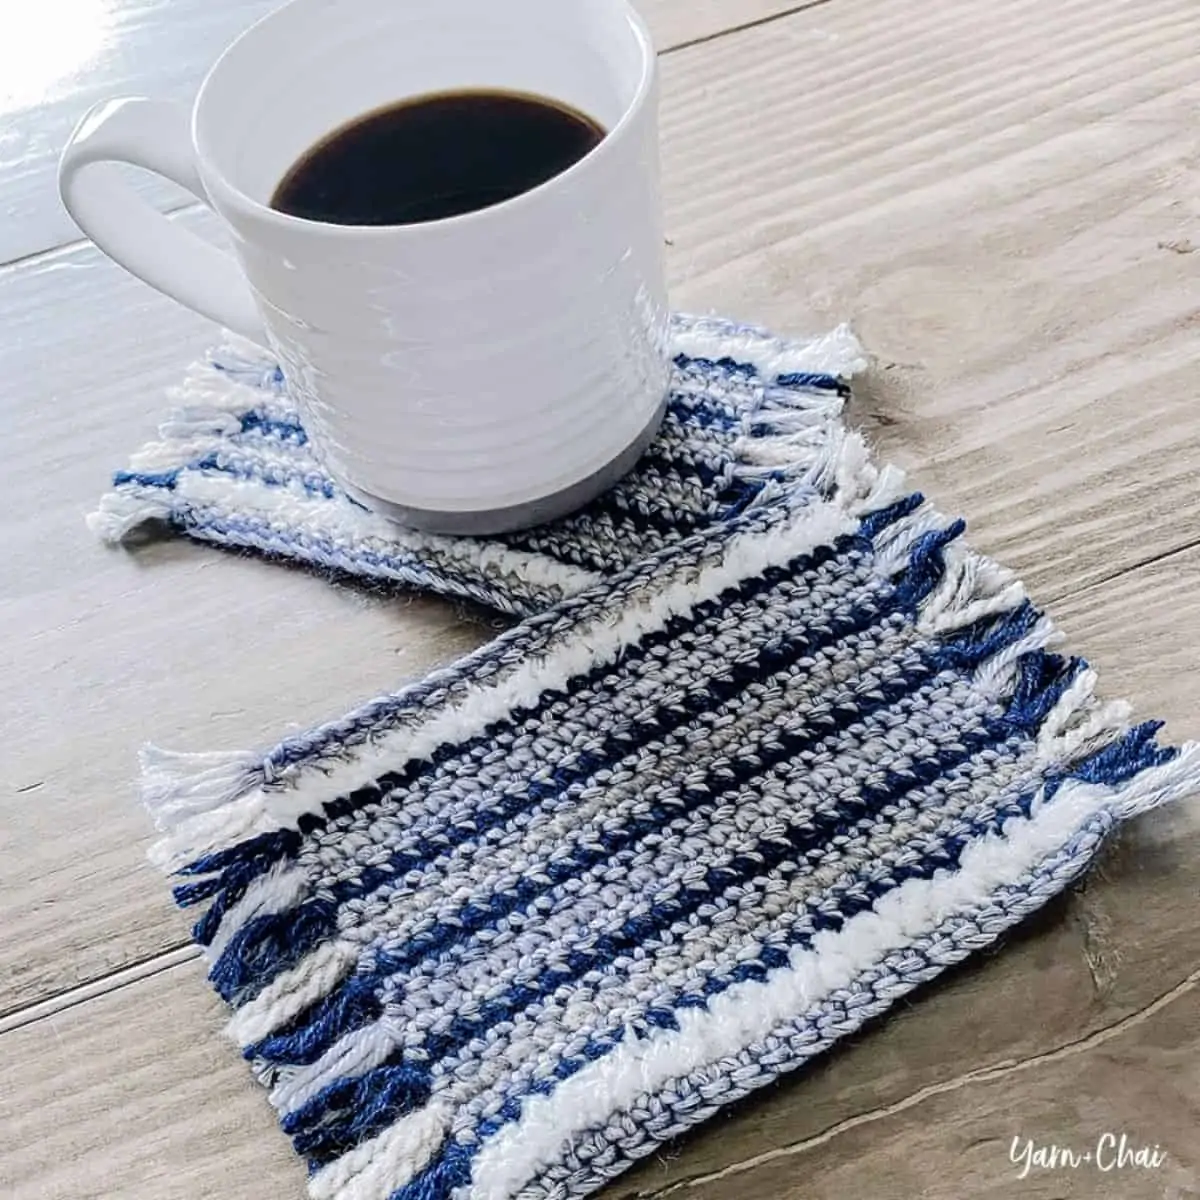 coffee cup and multicolored striped crochet coasters on a table